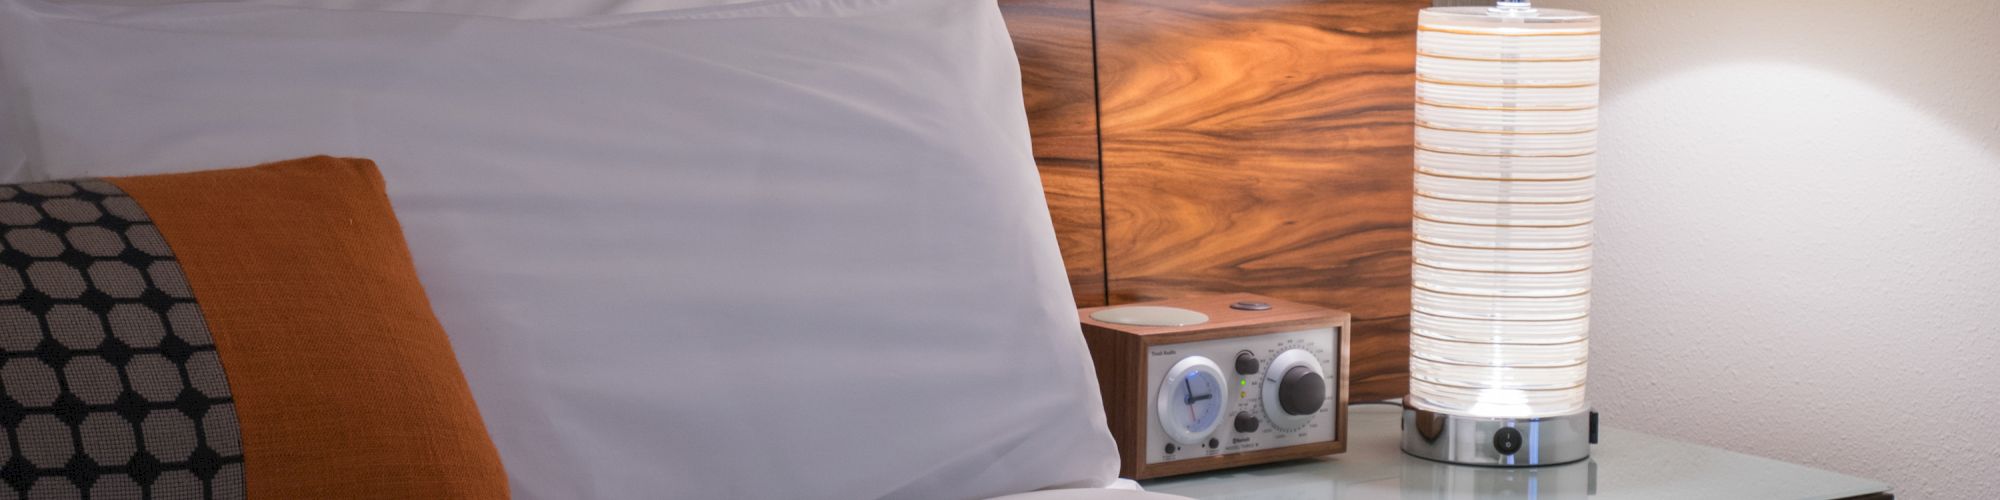 A neatly made bed with white sheets and pillows, orange and patterned cushions, beside a wooden nightstand with a lamp and clock radio.